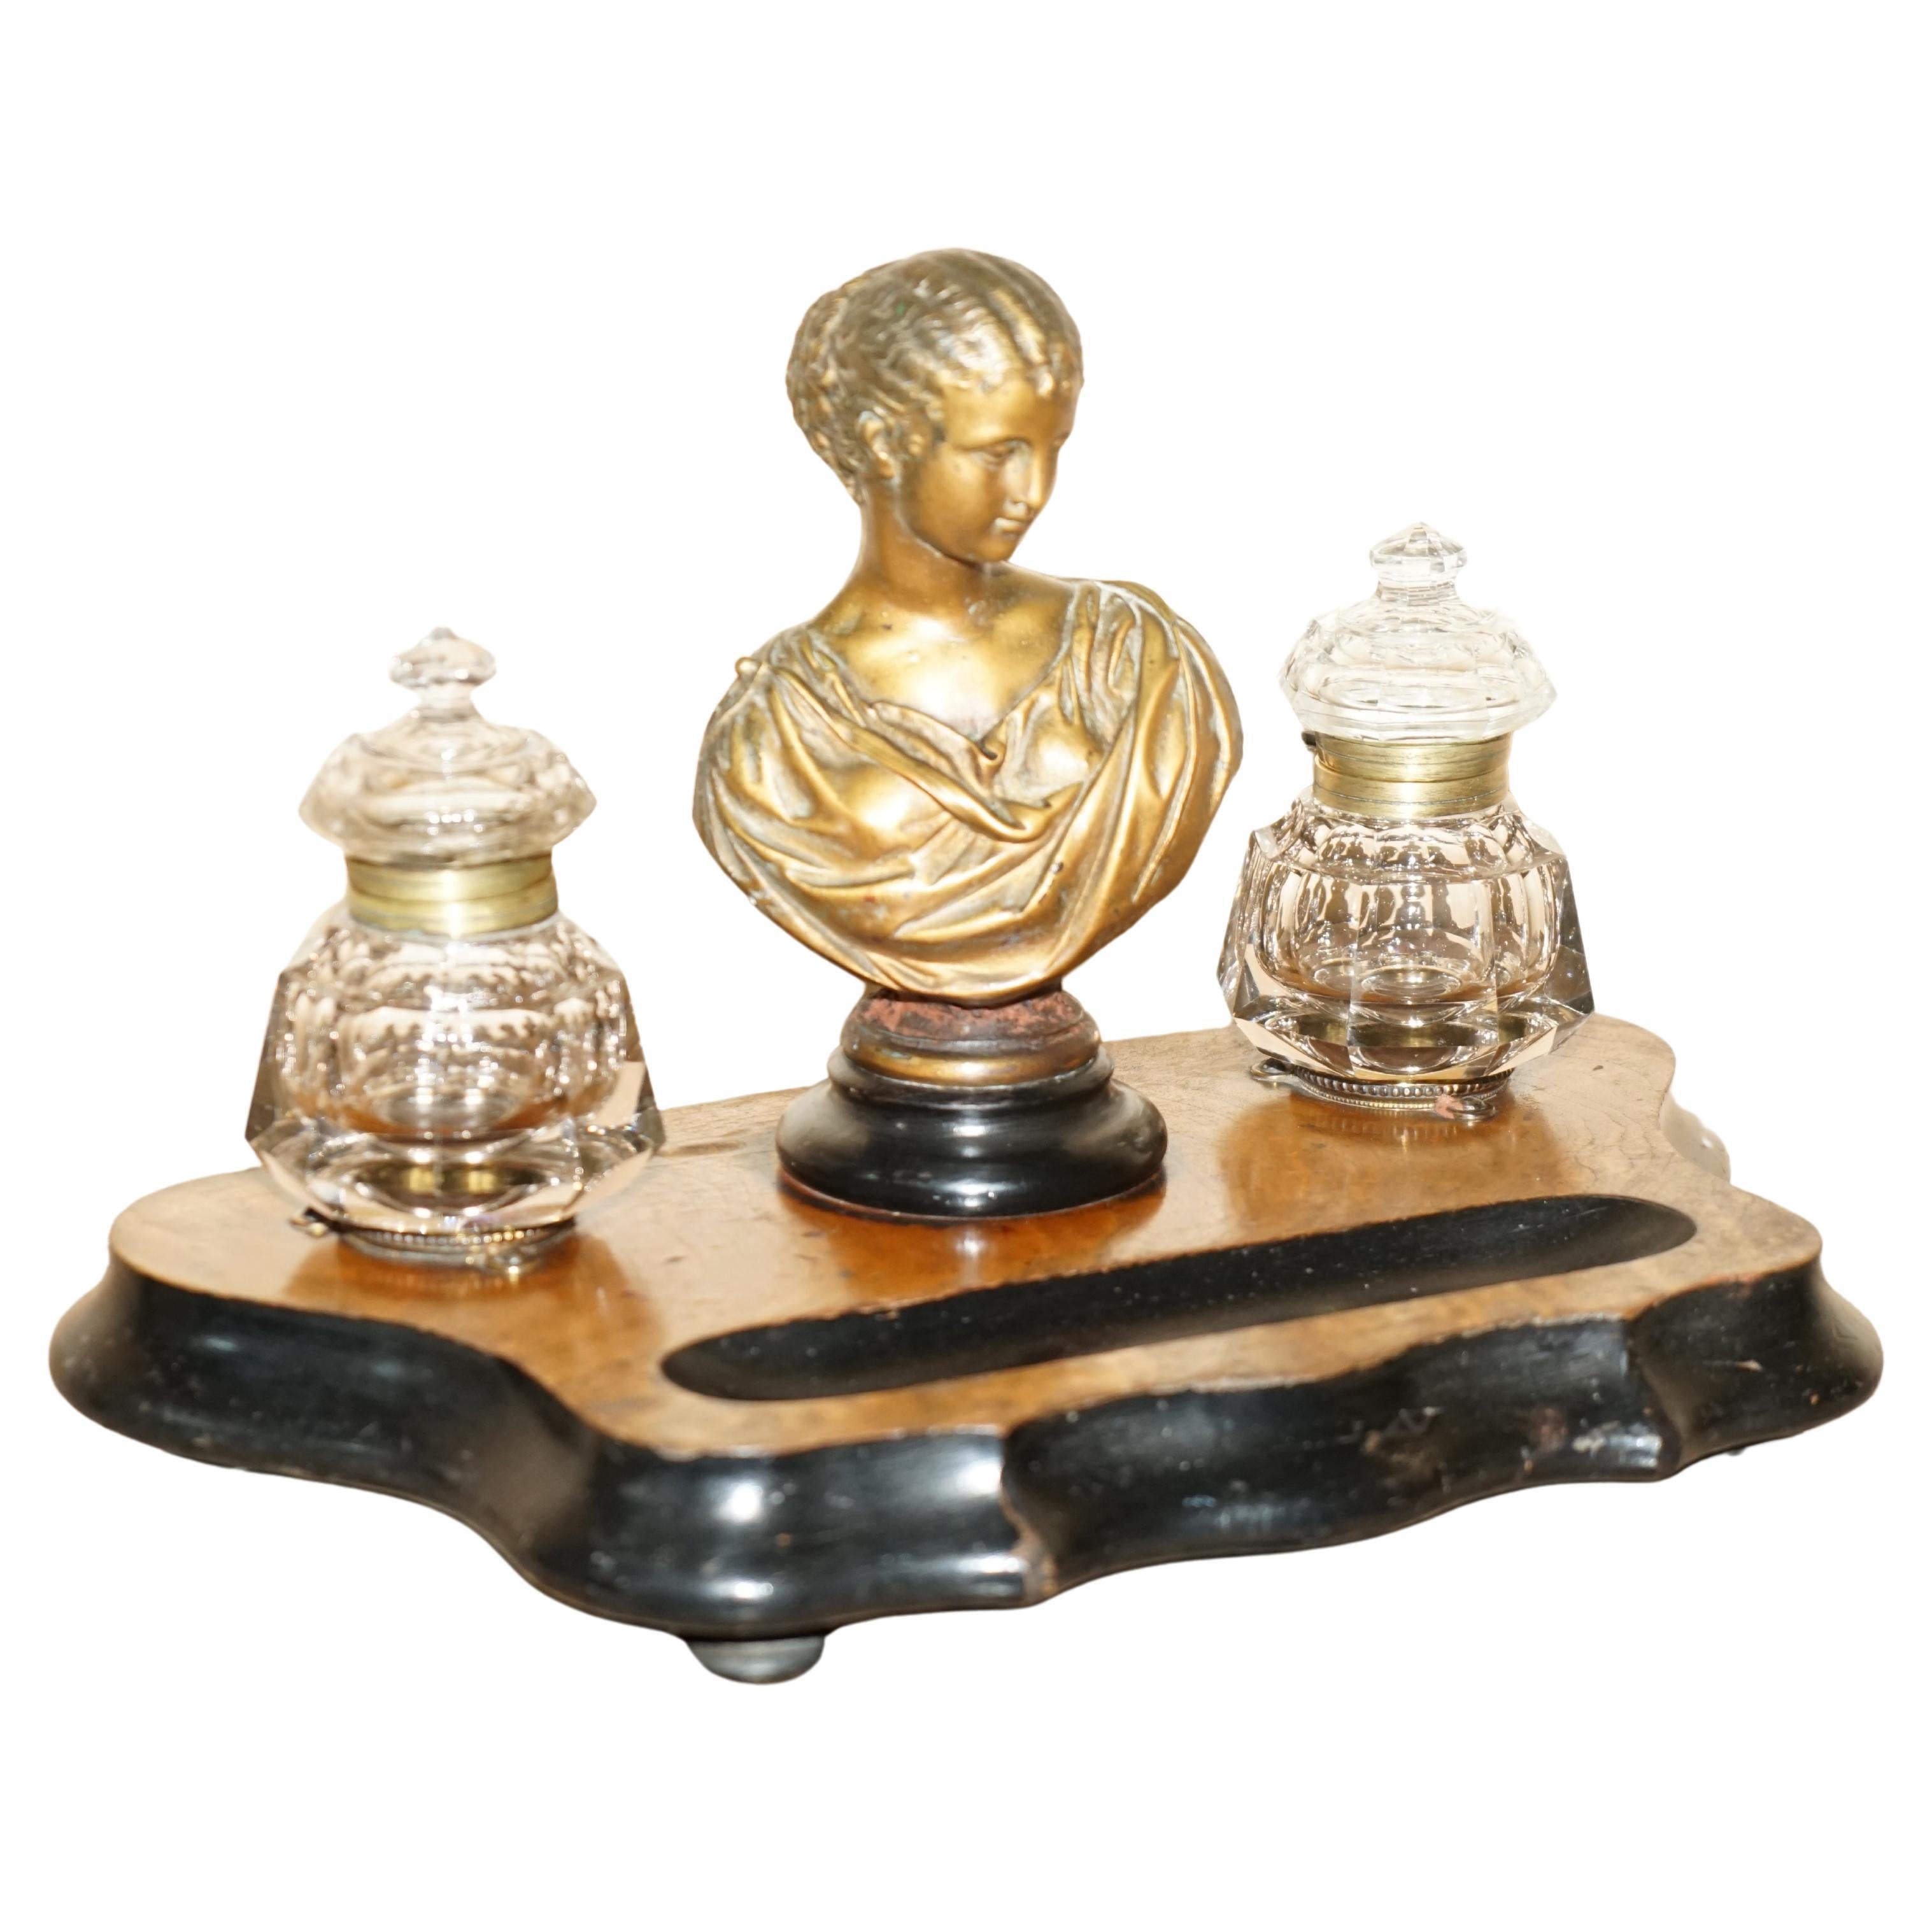 STUNNING ANTIQUE FRENCH BRONZE STATUE ON INKWELL STAND CiRCA 1880